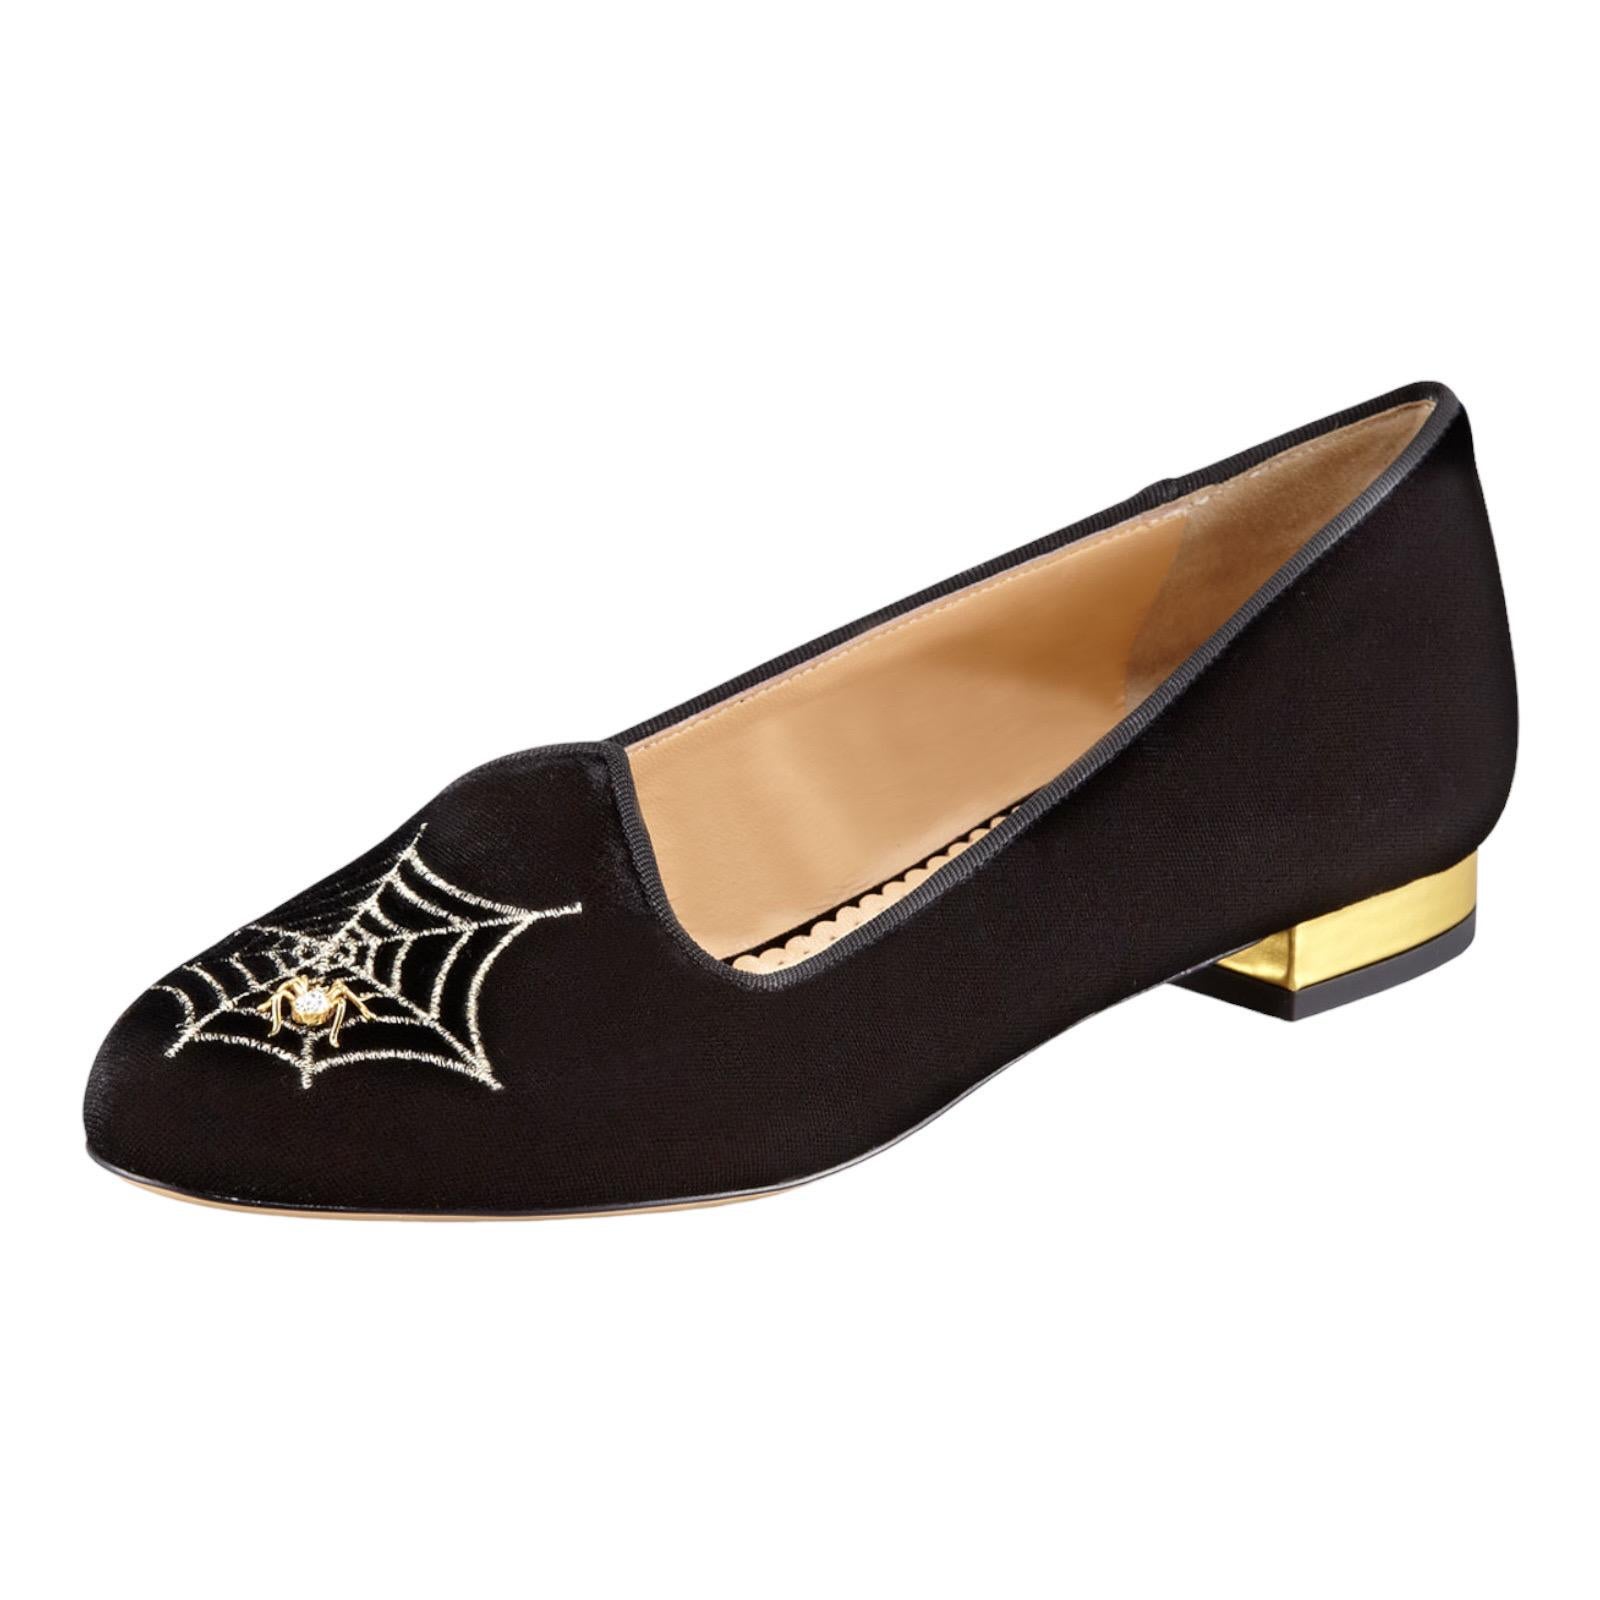 NEW
Charlotte Olympia Charlotte Spider-Embroidered Slippers

Refresh your look-and lift your mood-with this Charlotte Olympia slipper, inspired by your favorite childhood tale. The whimsical design brings all the eye-catching style of the designer's